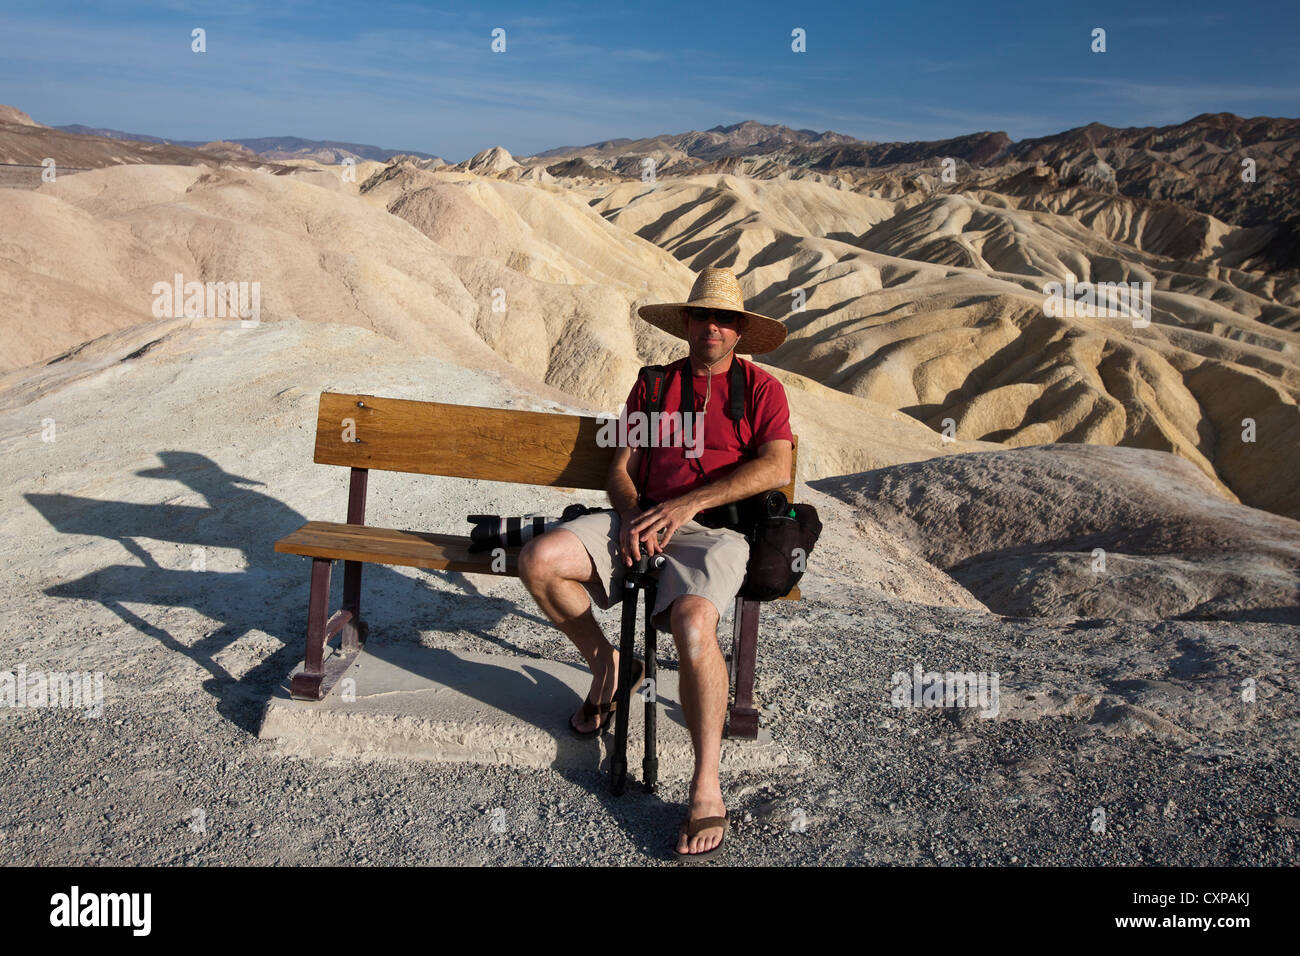 Adult male sits on park bench in front badlands Zabriskie Point Death Valley National Park California United States America Stock Photo